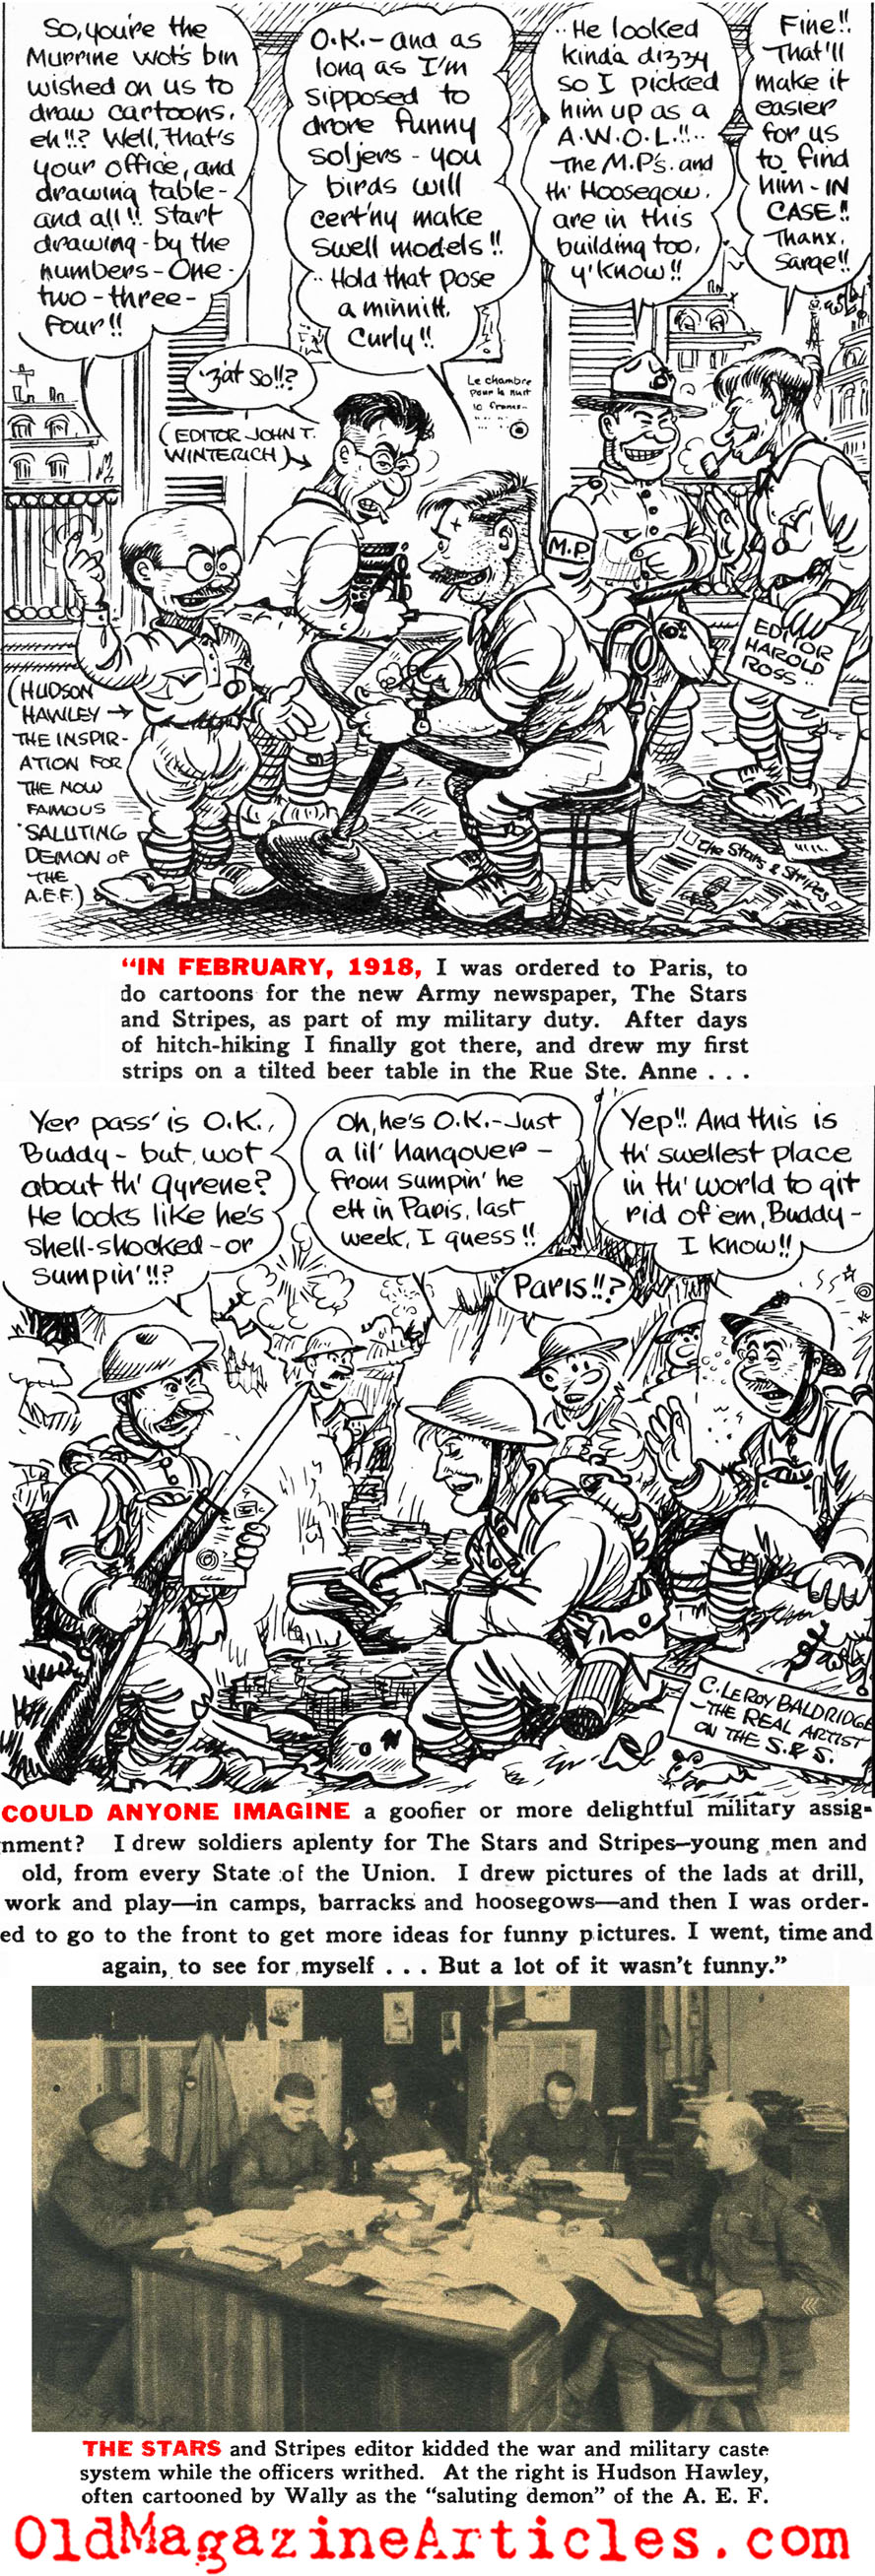 Cartoonist ''Wally'' Remembers (Click Magazine, 1938)